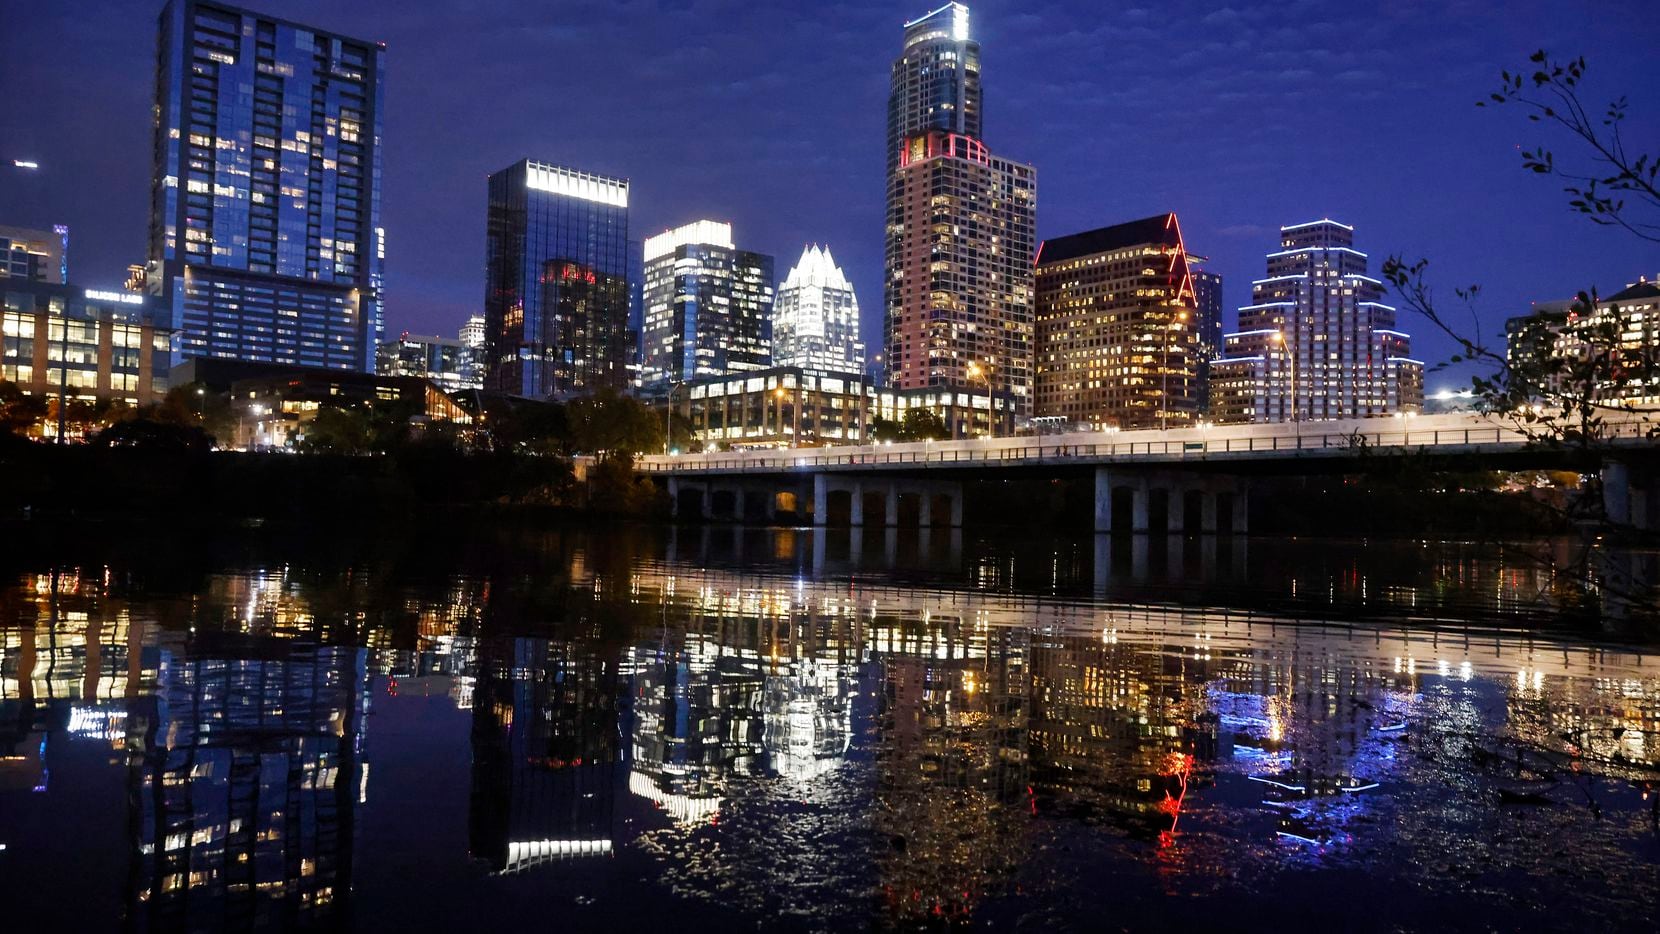 Austin's skyline glimmers in the night as seen at the First Street bridge over the Colorado...